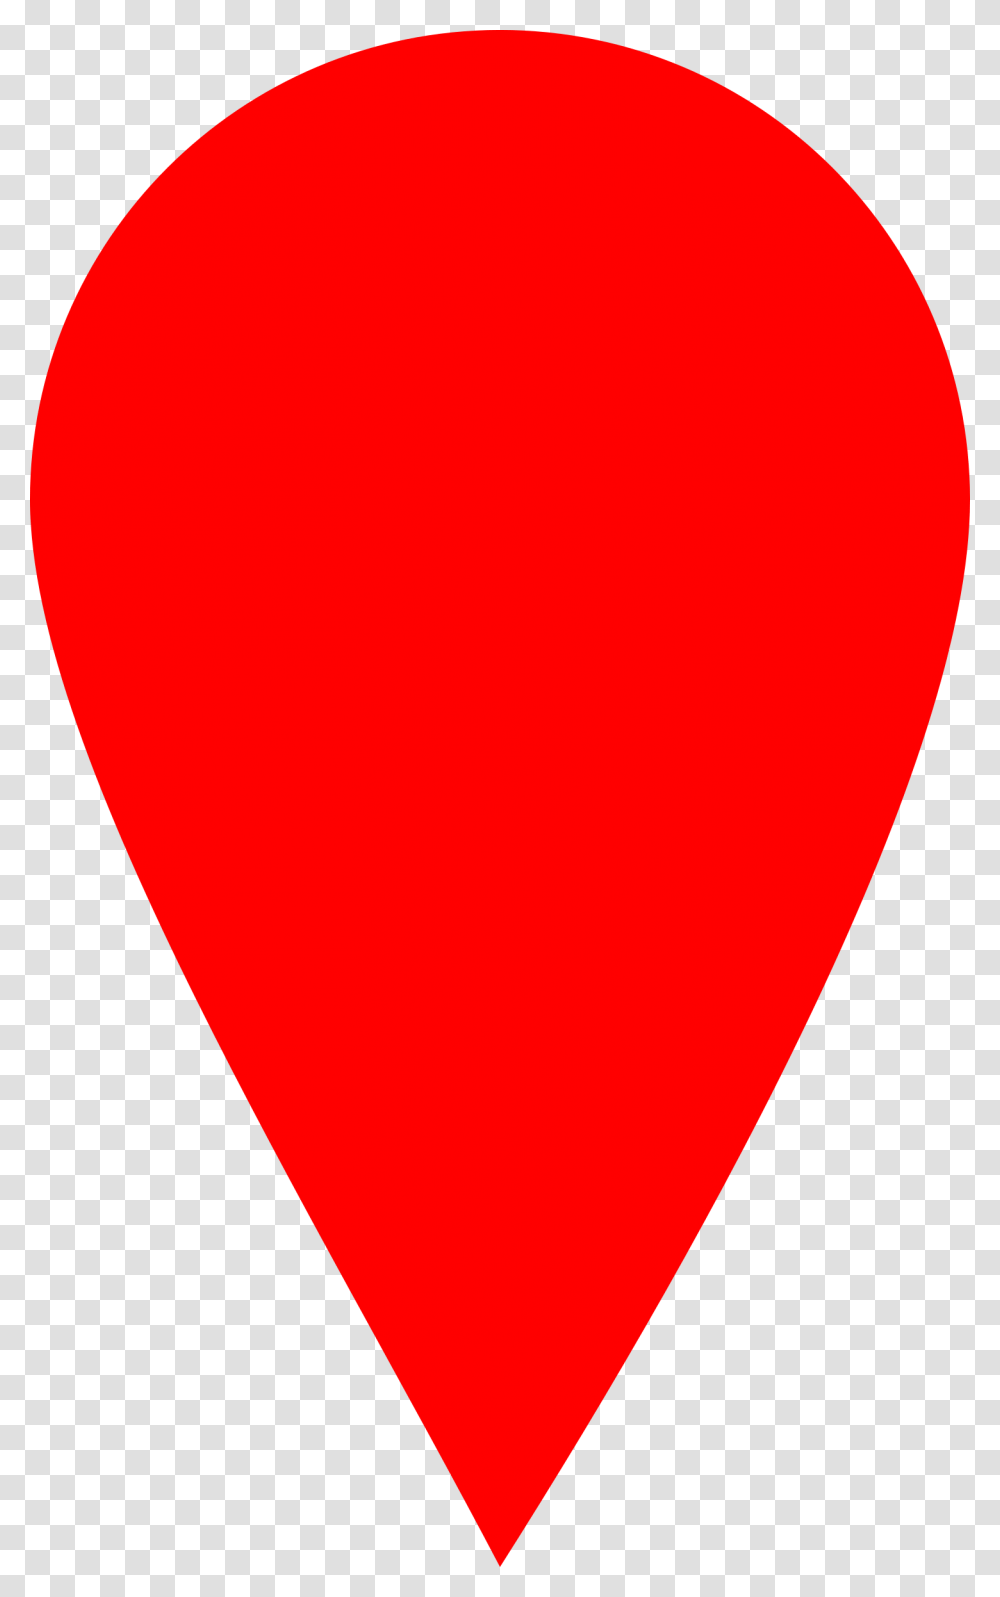 Red Map Locator Marker Icons, Plectrum, Balloon, Armor Transparent Png